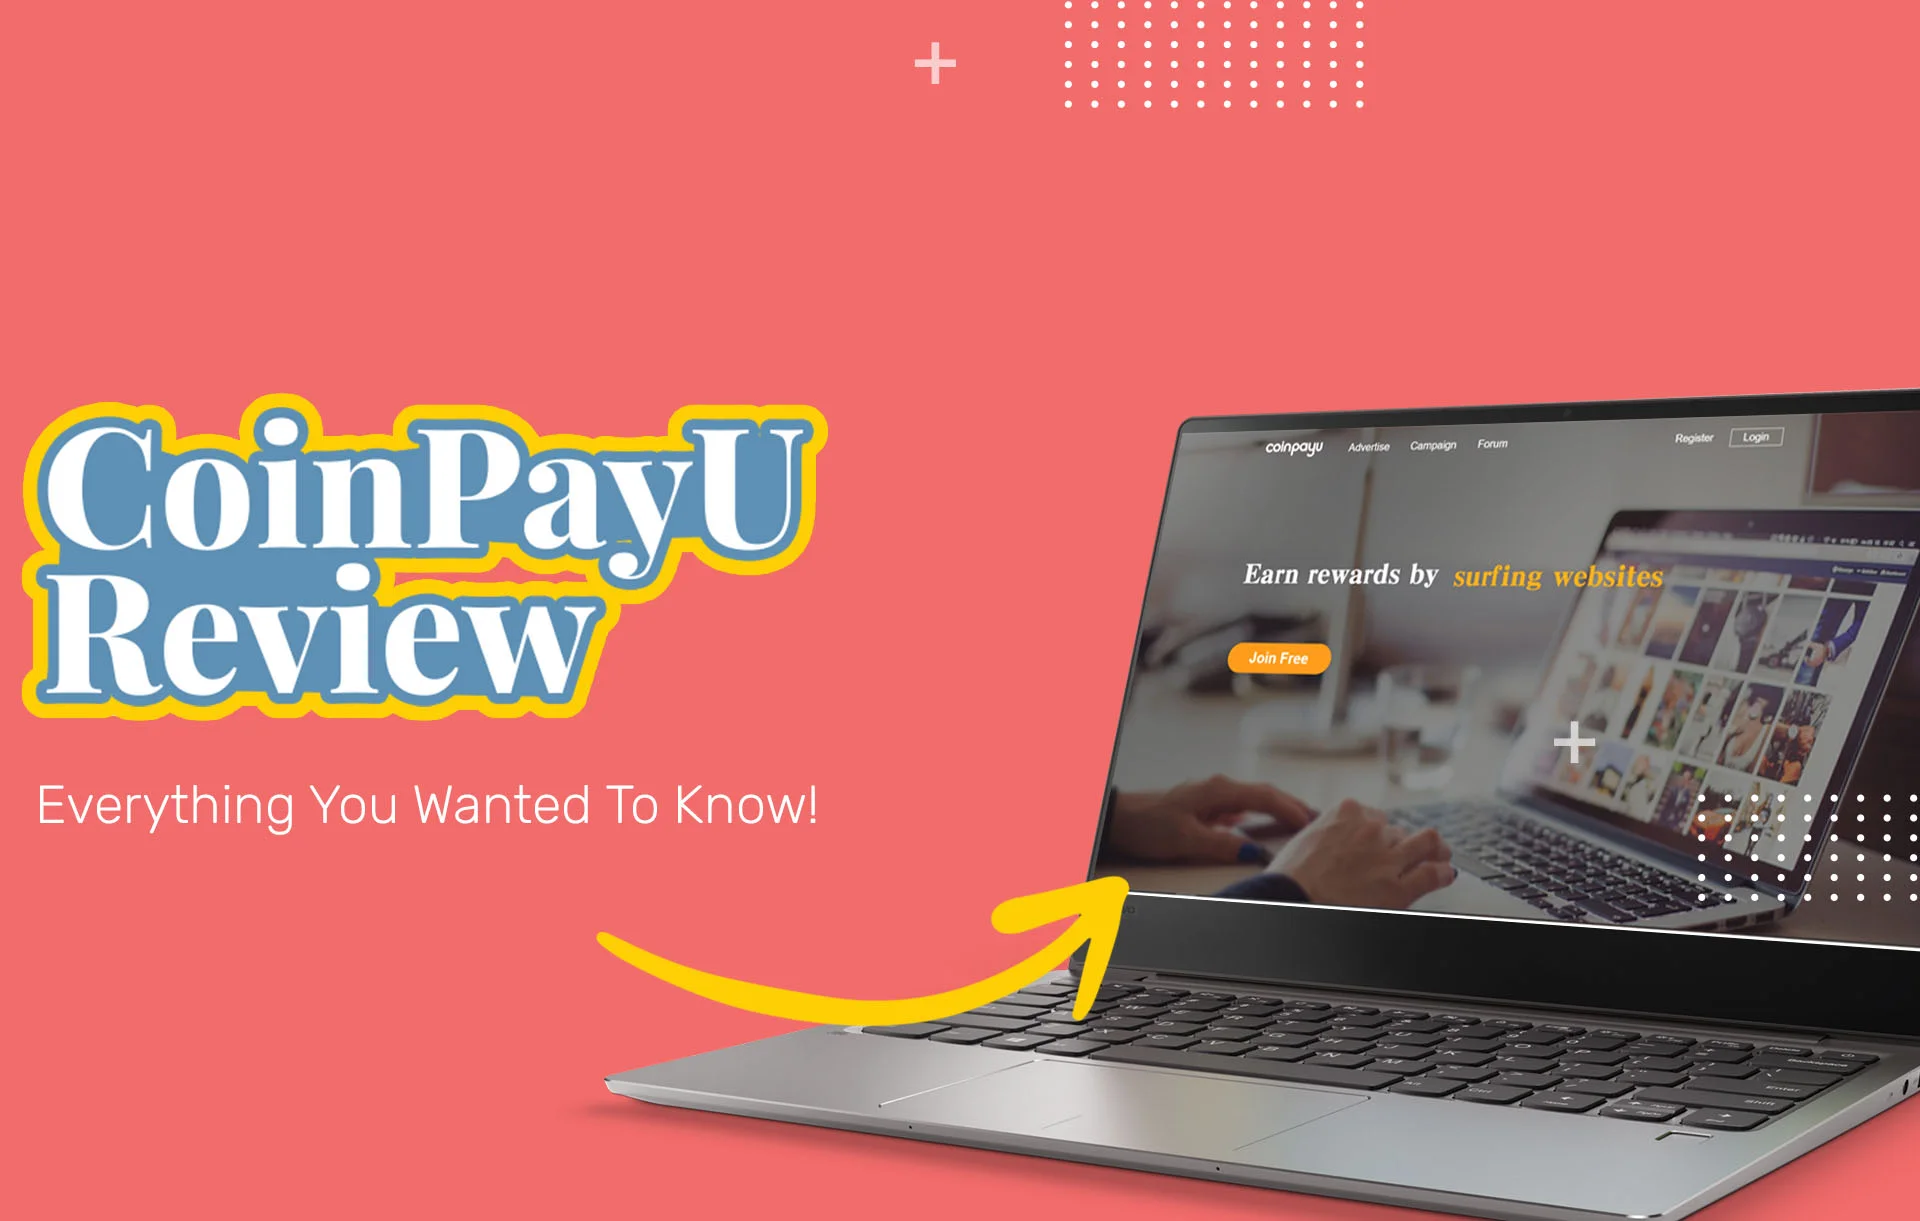 Coinpayu Reviews: Best Cryptocurrency Course?